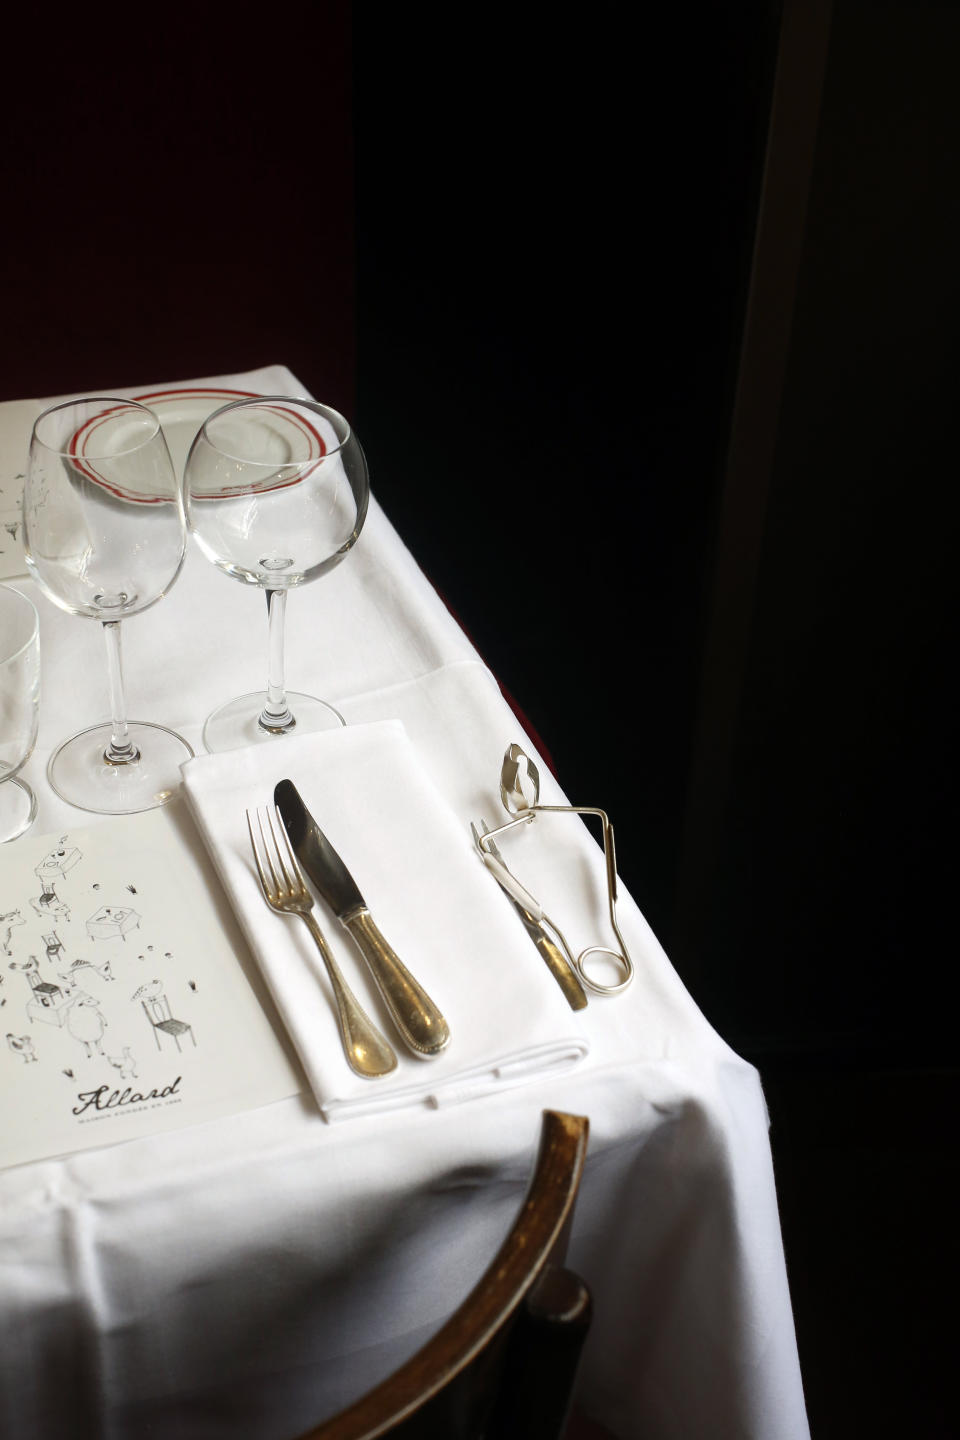 Glasses and cutlery are placed on a table of Alain Ducasse's restaurant « Allard », in Paris, Thursday, June 11, 2020. French Michelin-starred chef Alain Ducasse unveils virus-protection measures as he prepares to reopen his restaurants, including a new filtration system that works to stop virus particles from the air traveling to neighboring tables. (AP Photo/Thibault Camus)